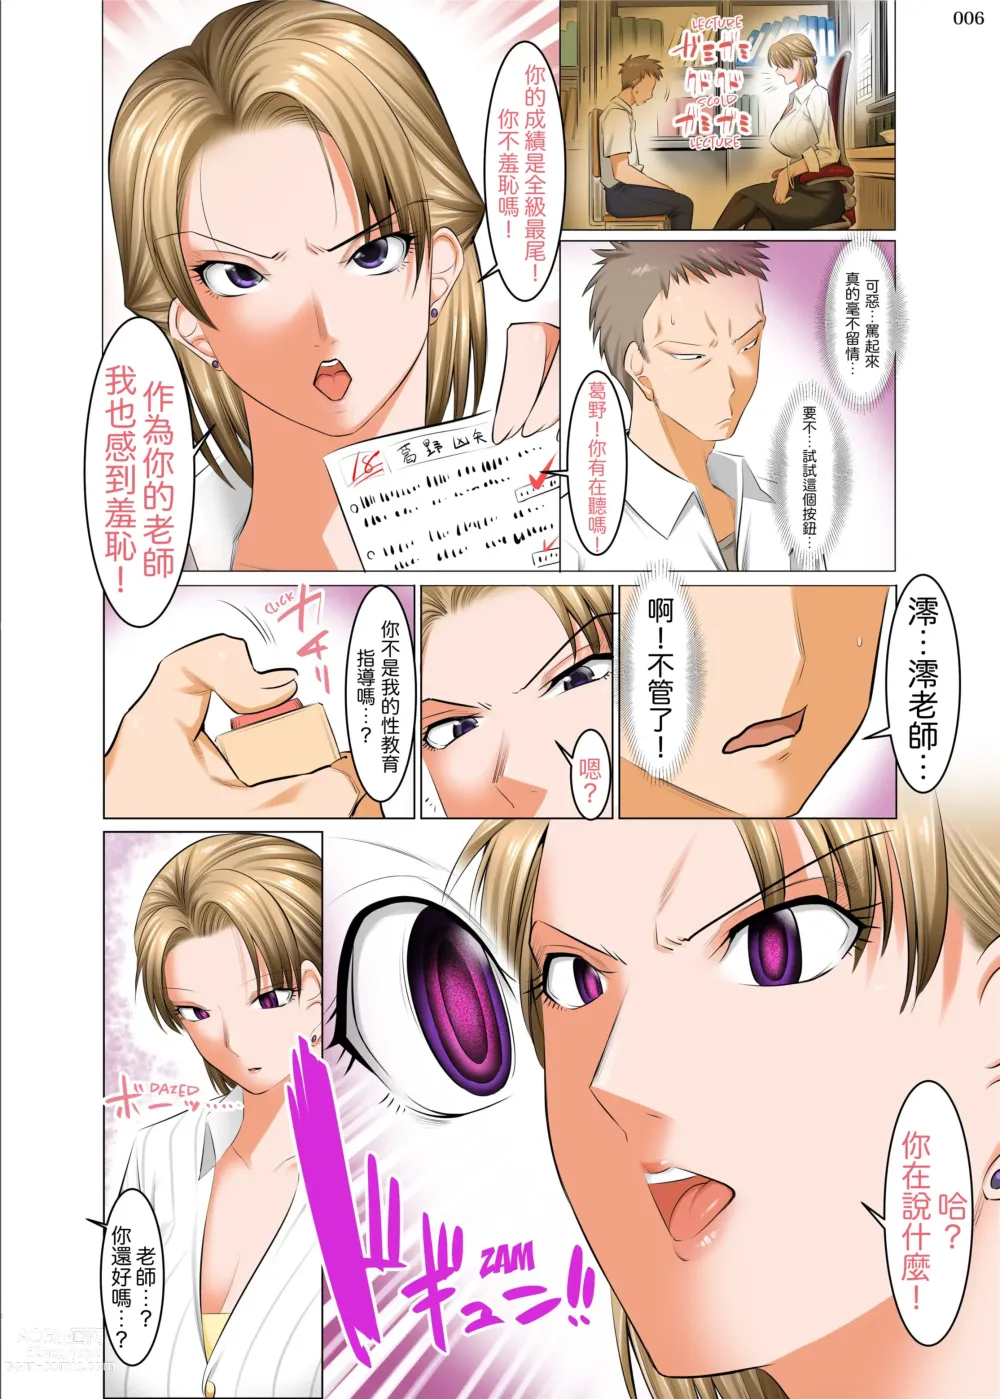 Page 5 of doujinshi Hypnosis Sex Ed: Isn't Your Subject Sex Ed? (decensored)